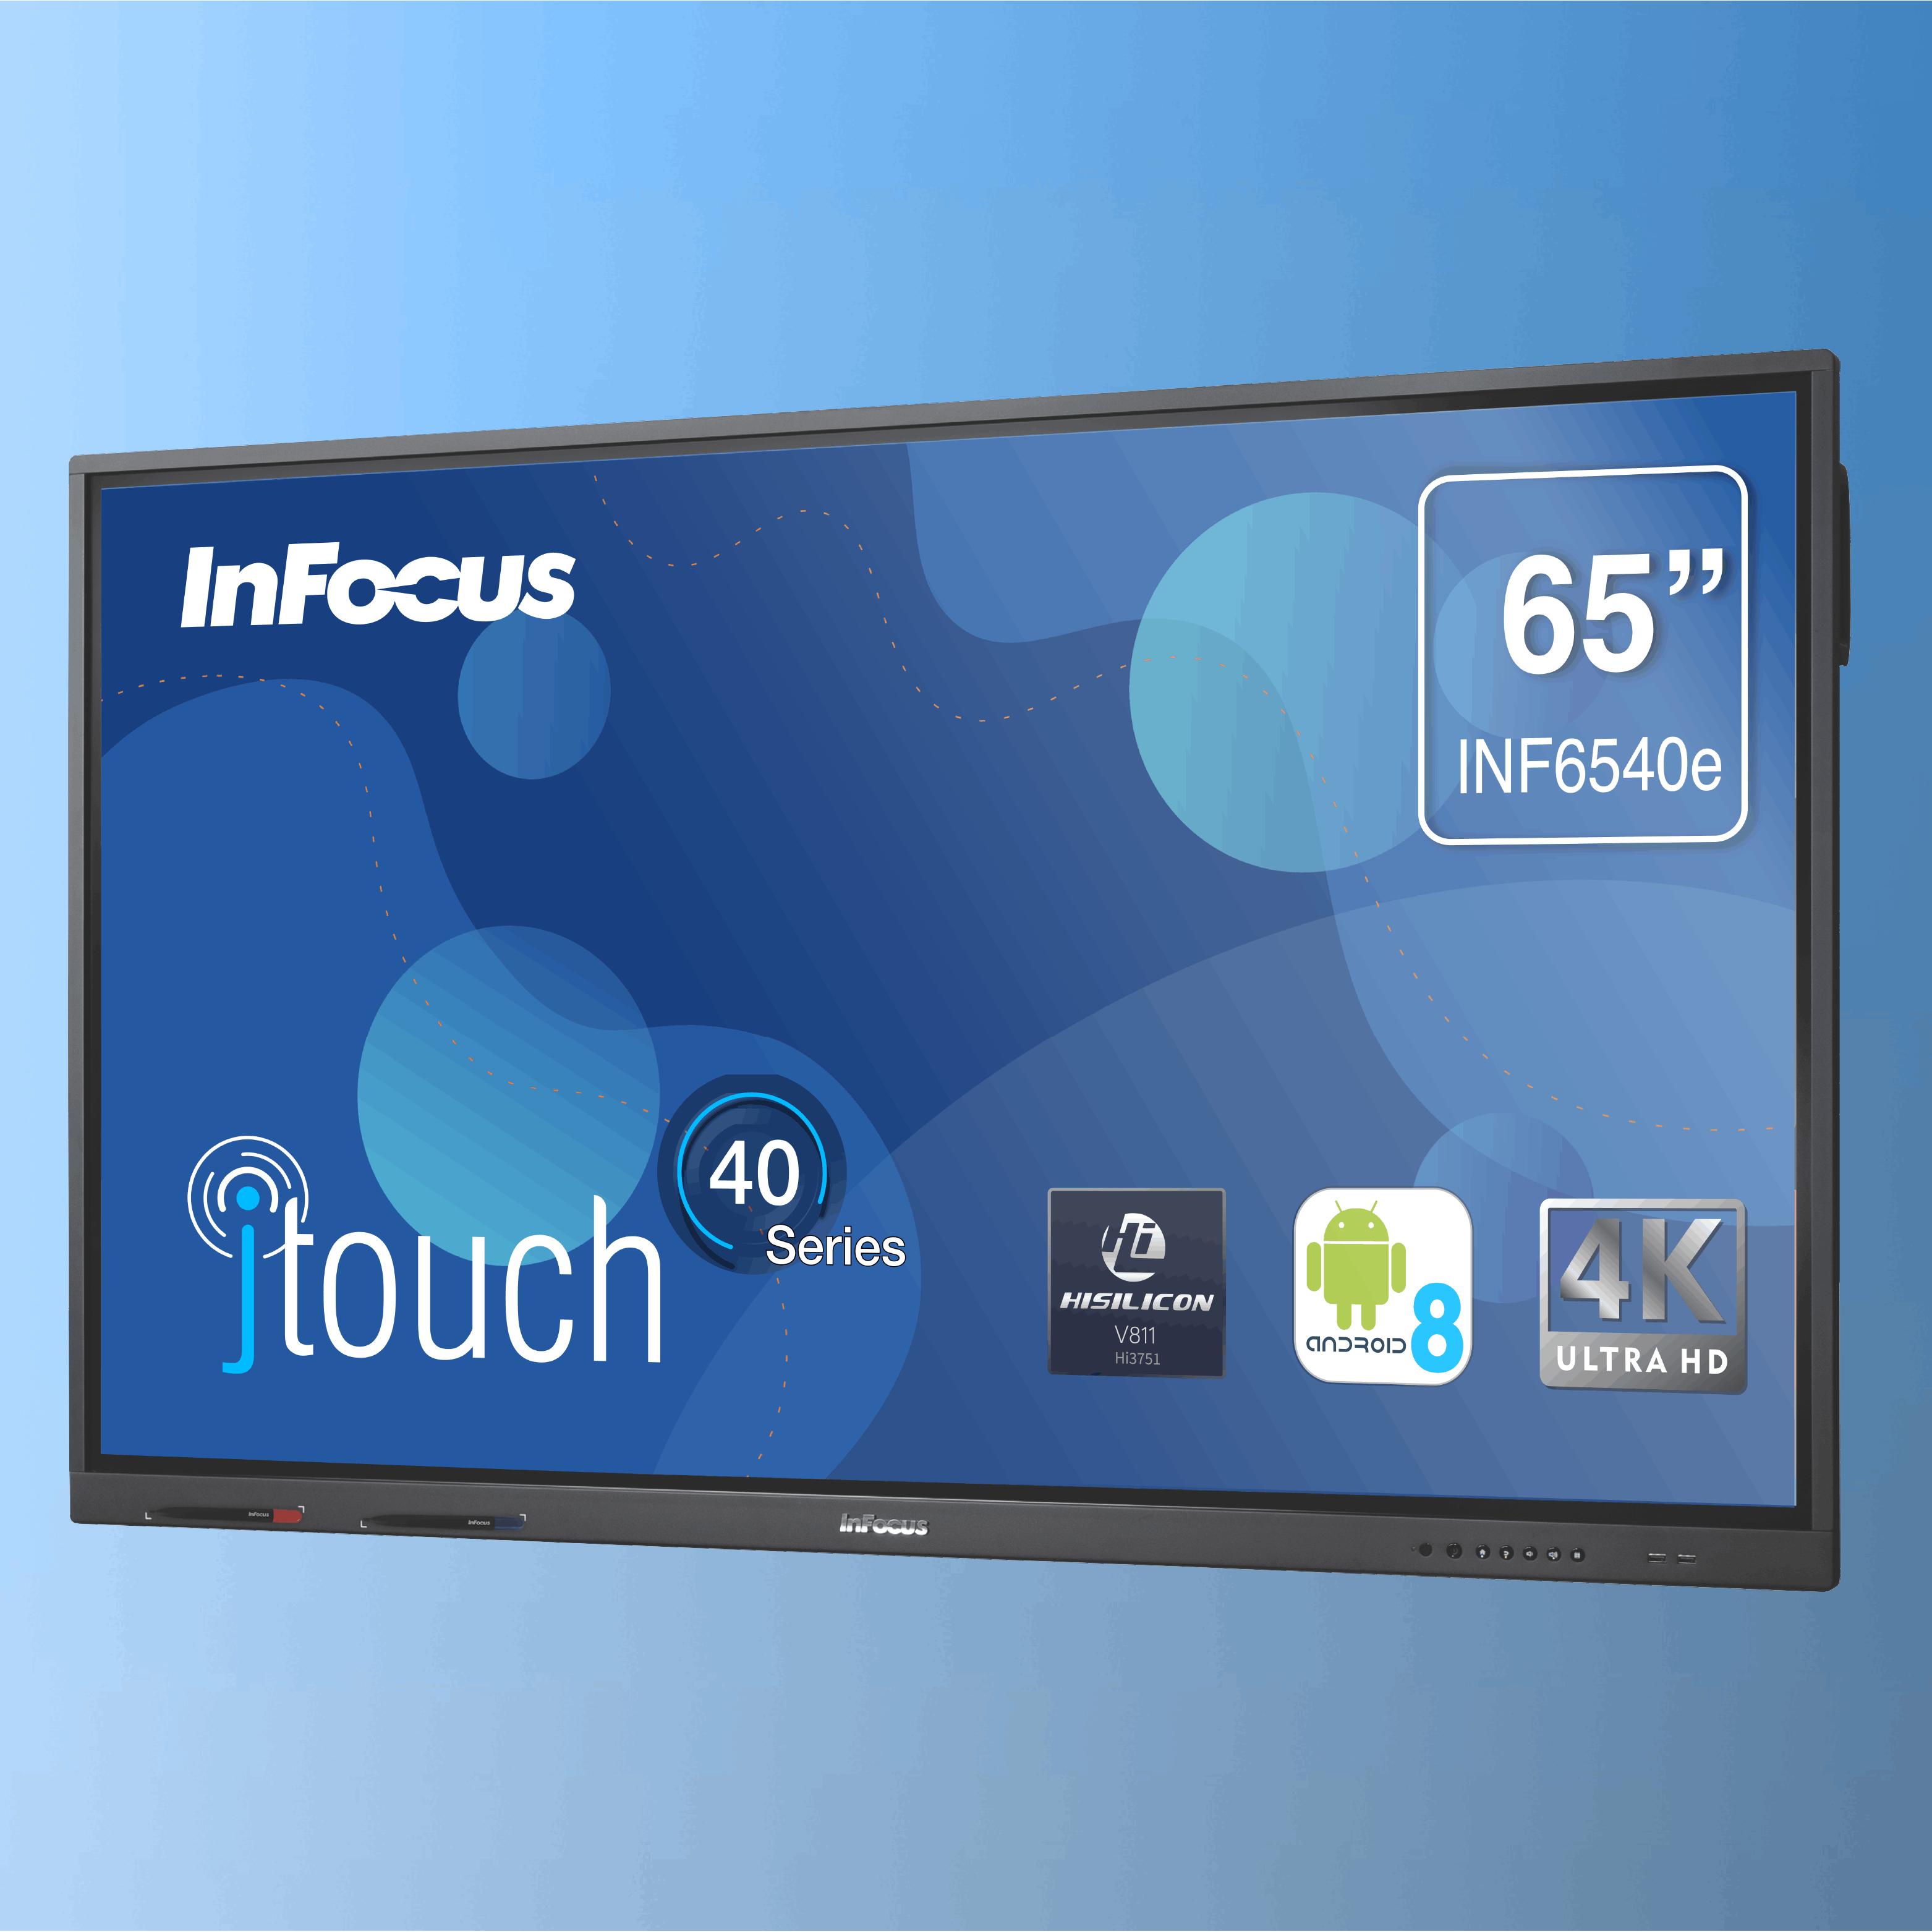 JTouch Series 40 - INF8640e